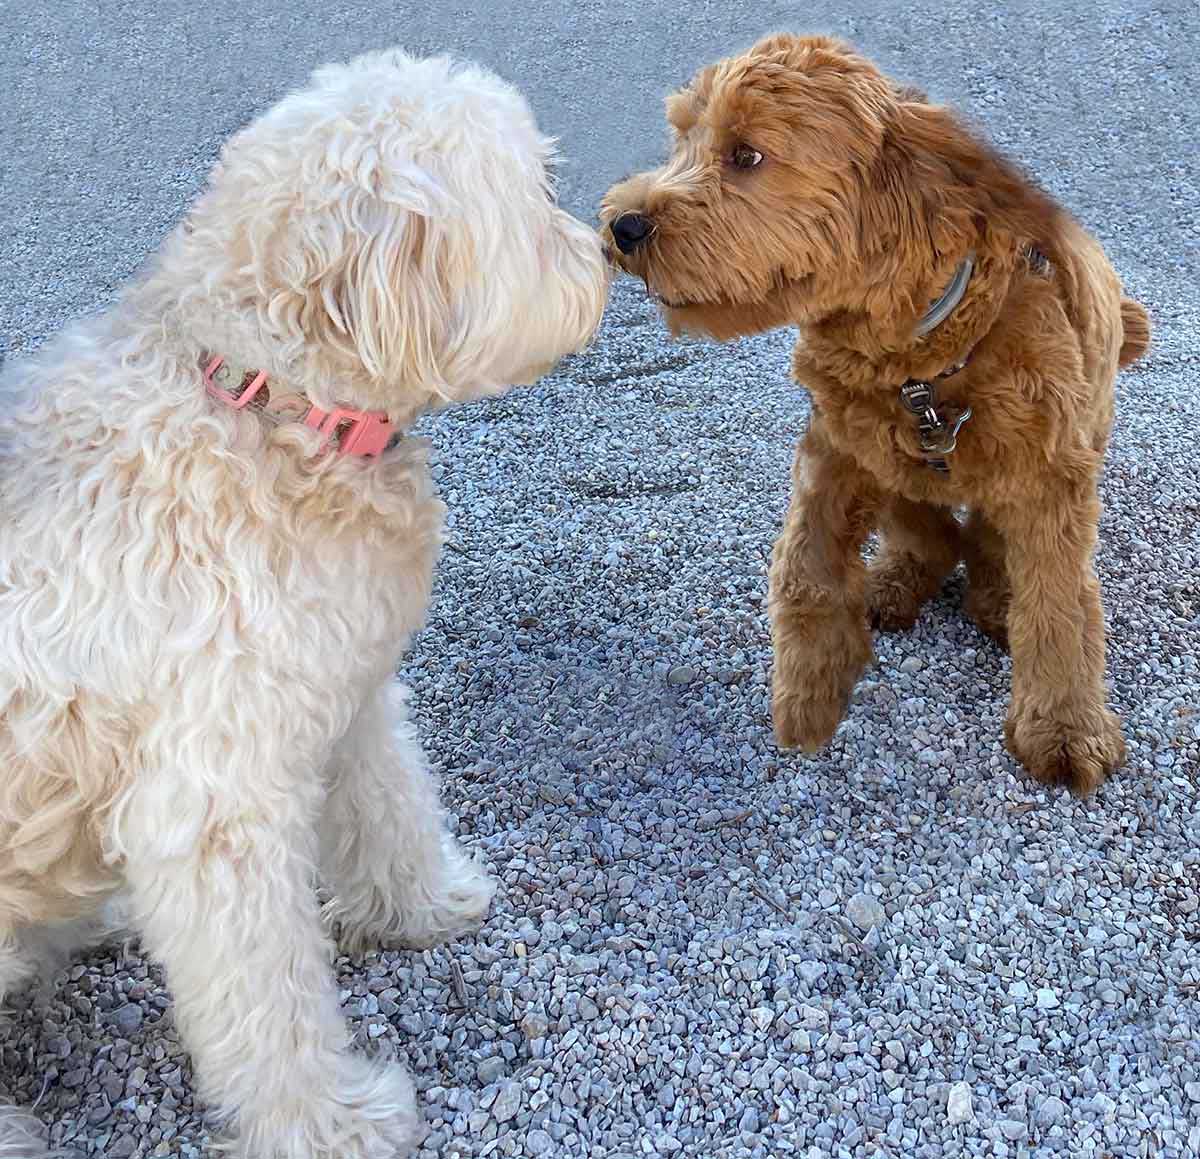 blond mini goldendoodle sniffing and kissing brown mini goldendoodle on rocky ground